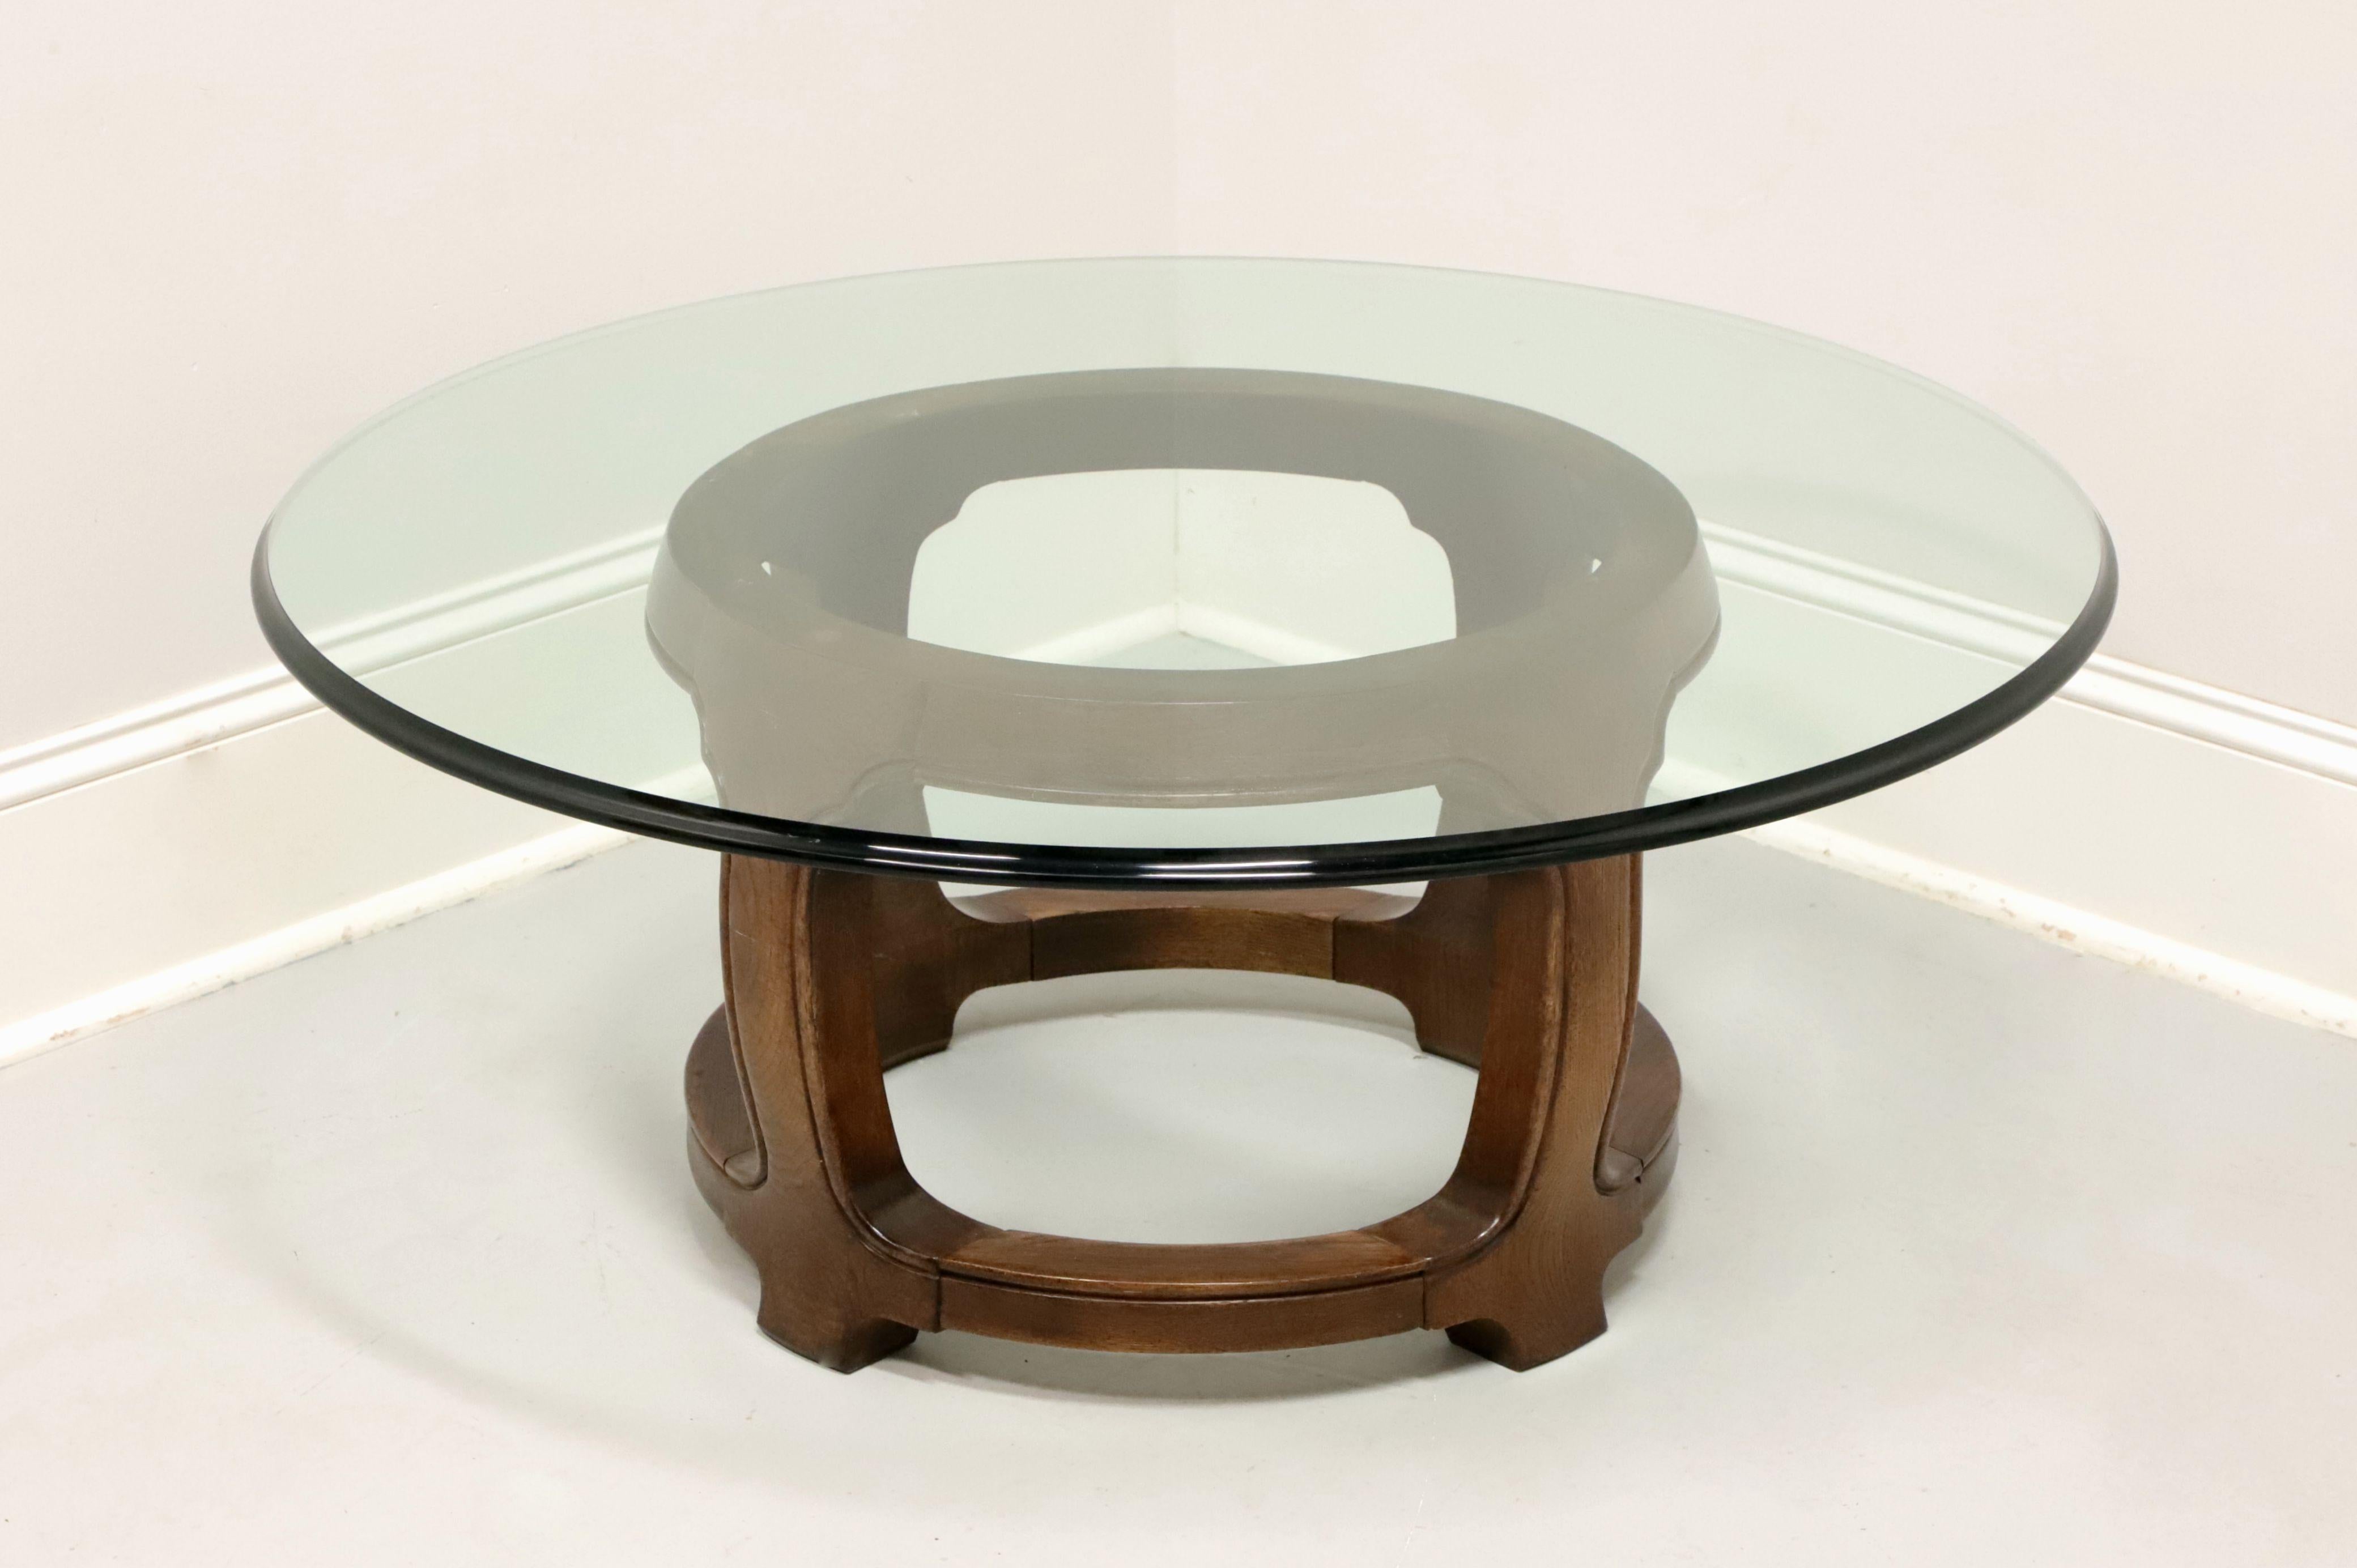 An Asian inspired cocktail table by Thomasville. Solid walnut in a round shape providing support for the ogee edge glass top. Made in North Carolina, USA, in the late 20th century.

Style #: 5531-170

Measures: Overall: 39.5w 39.5d 16.25h,